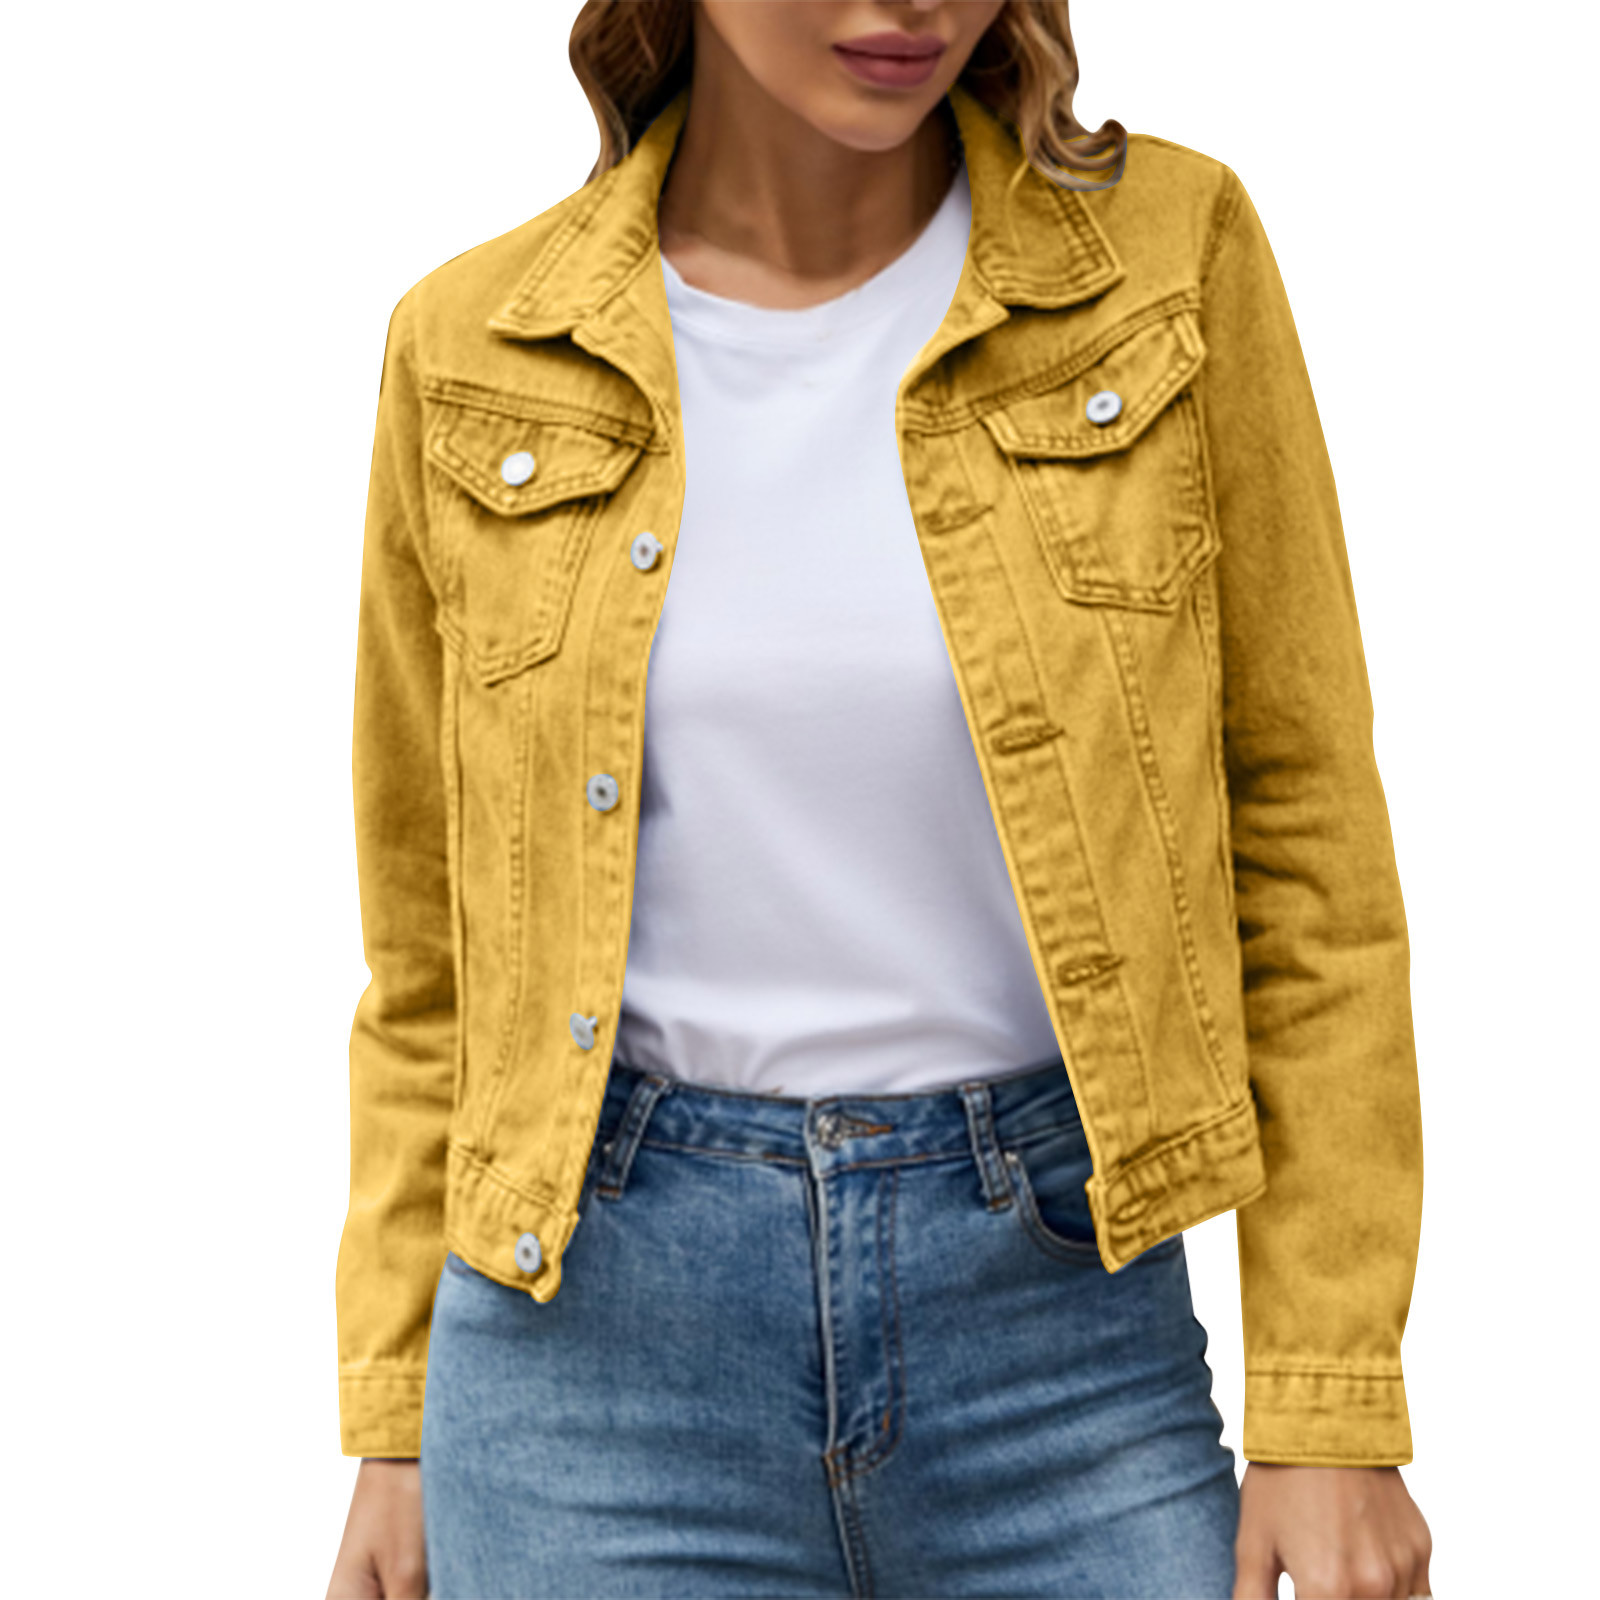 iOPQO womens sweaters Women's Basic Solid Color Button Down Denim Cotton Jacket With Pockets Denim Jacket Coat Women's Denim Jackets Yellow M - image 3 of 8